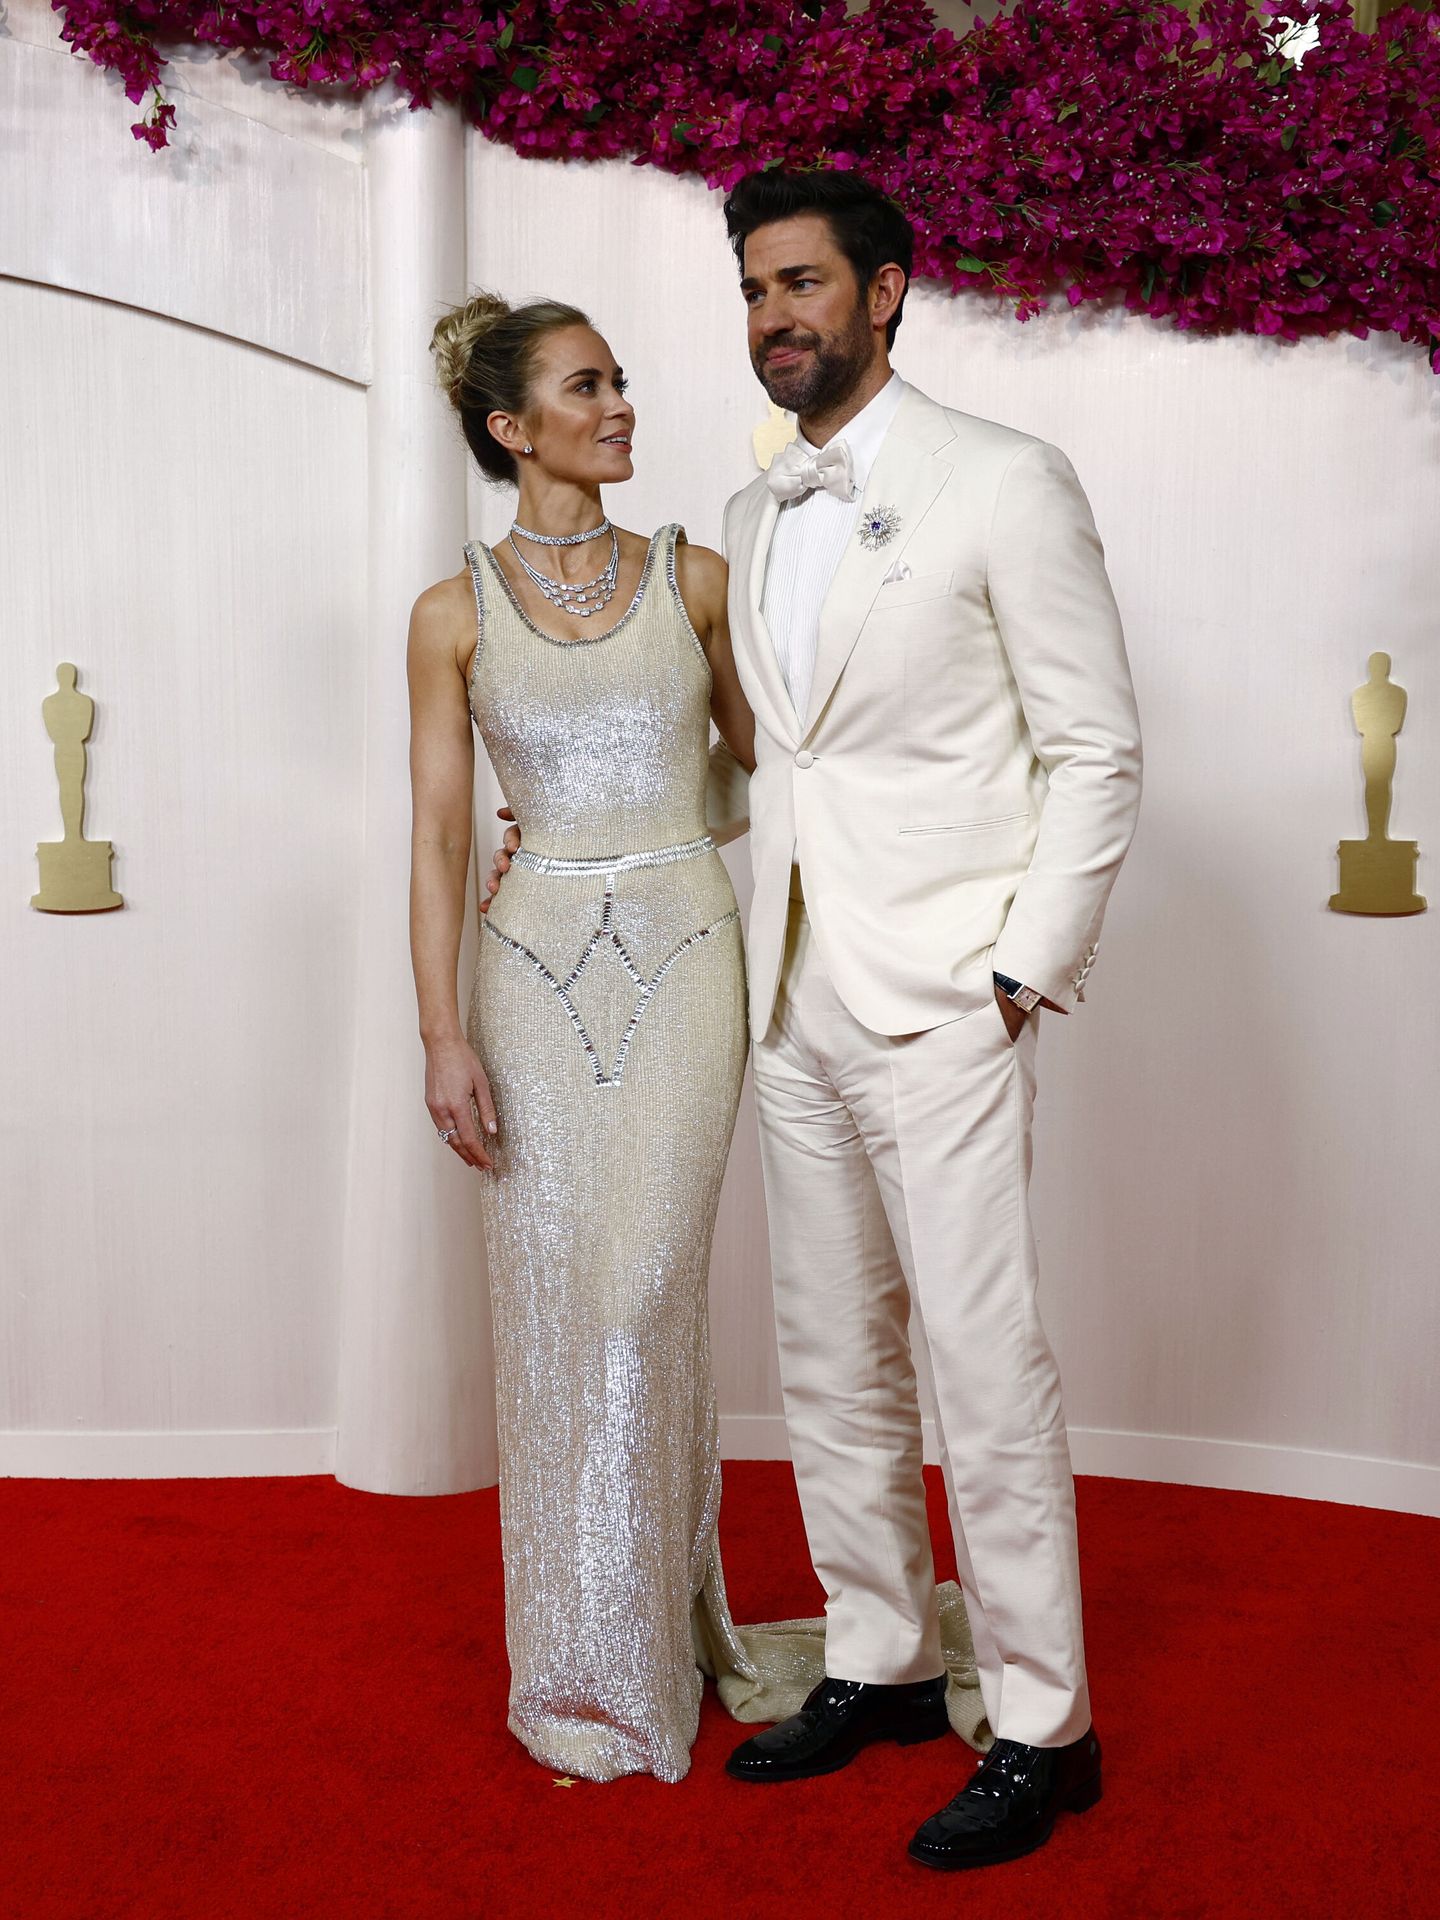 John Krasinski and Emily Blunt pose on the red carpet during the Oscars arrivals at the 96th Academy Awards in Hollywood, Los Angeles, California, U.S., March 10, 2024. REUTERS Sarah Meyssonnier